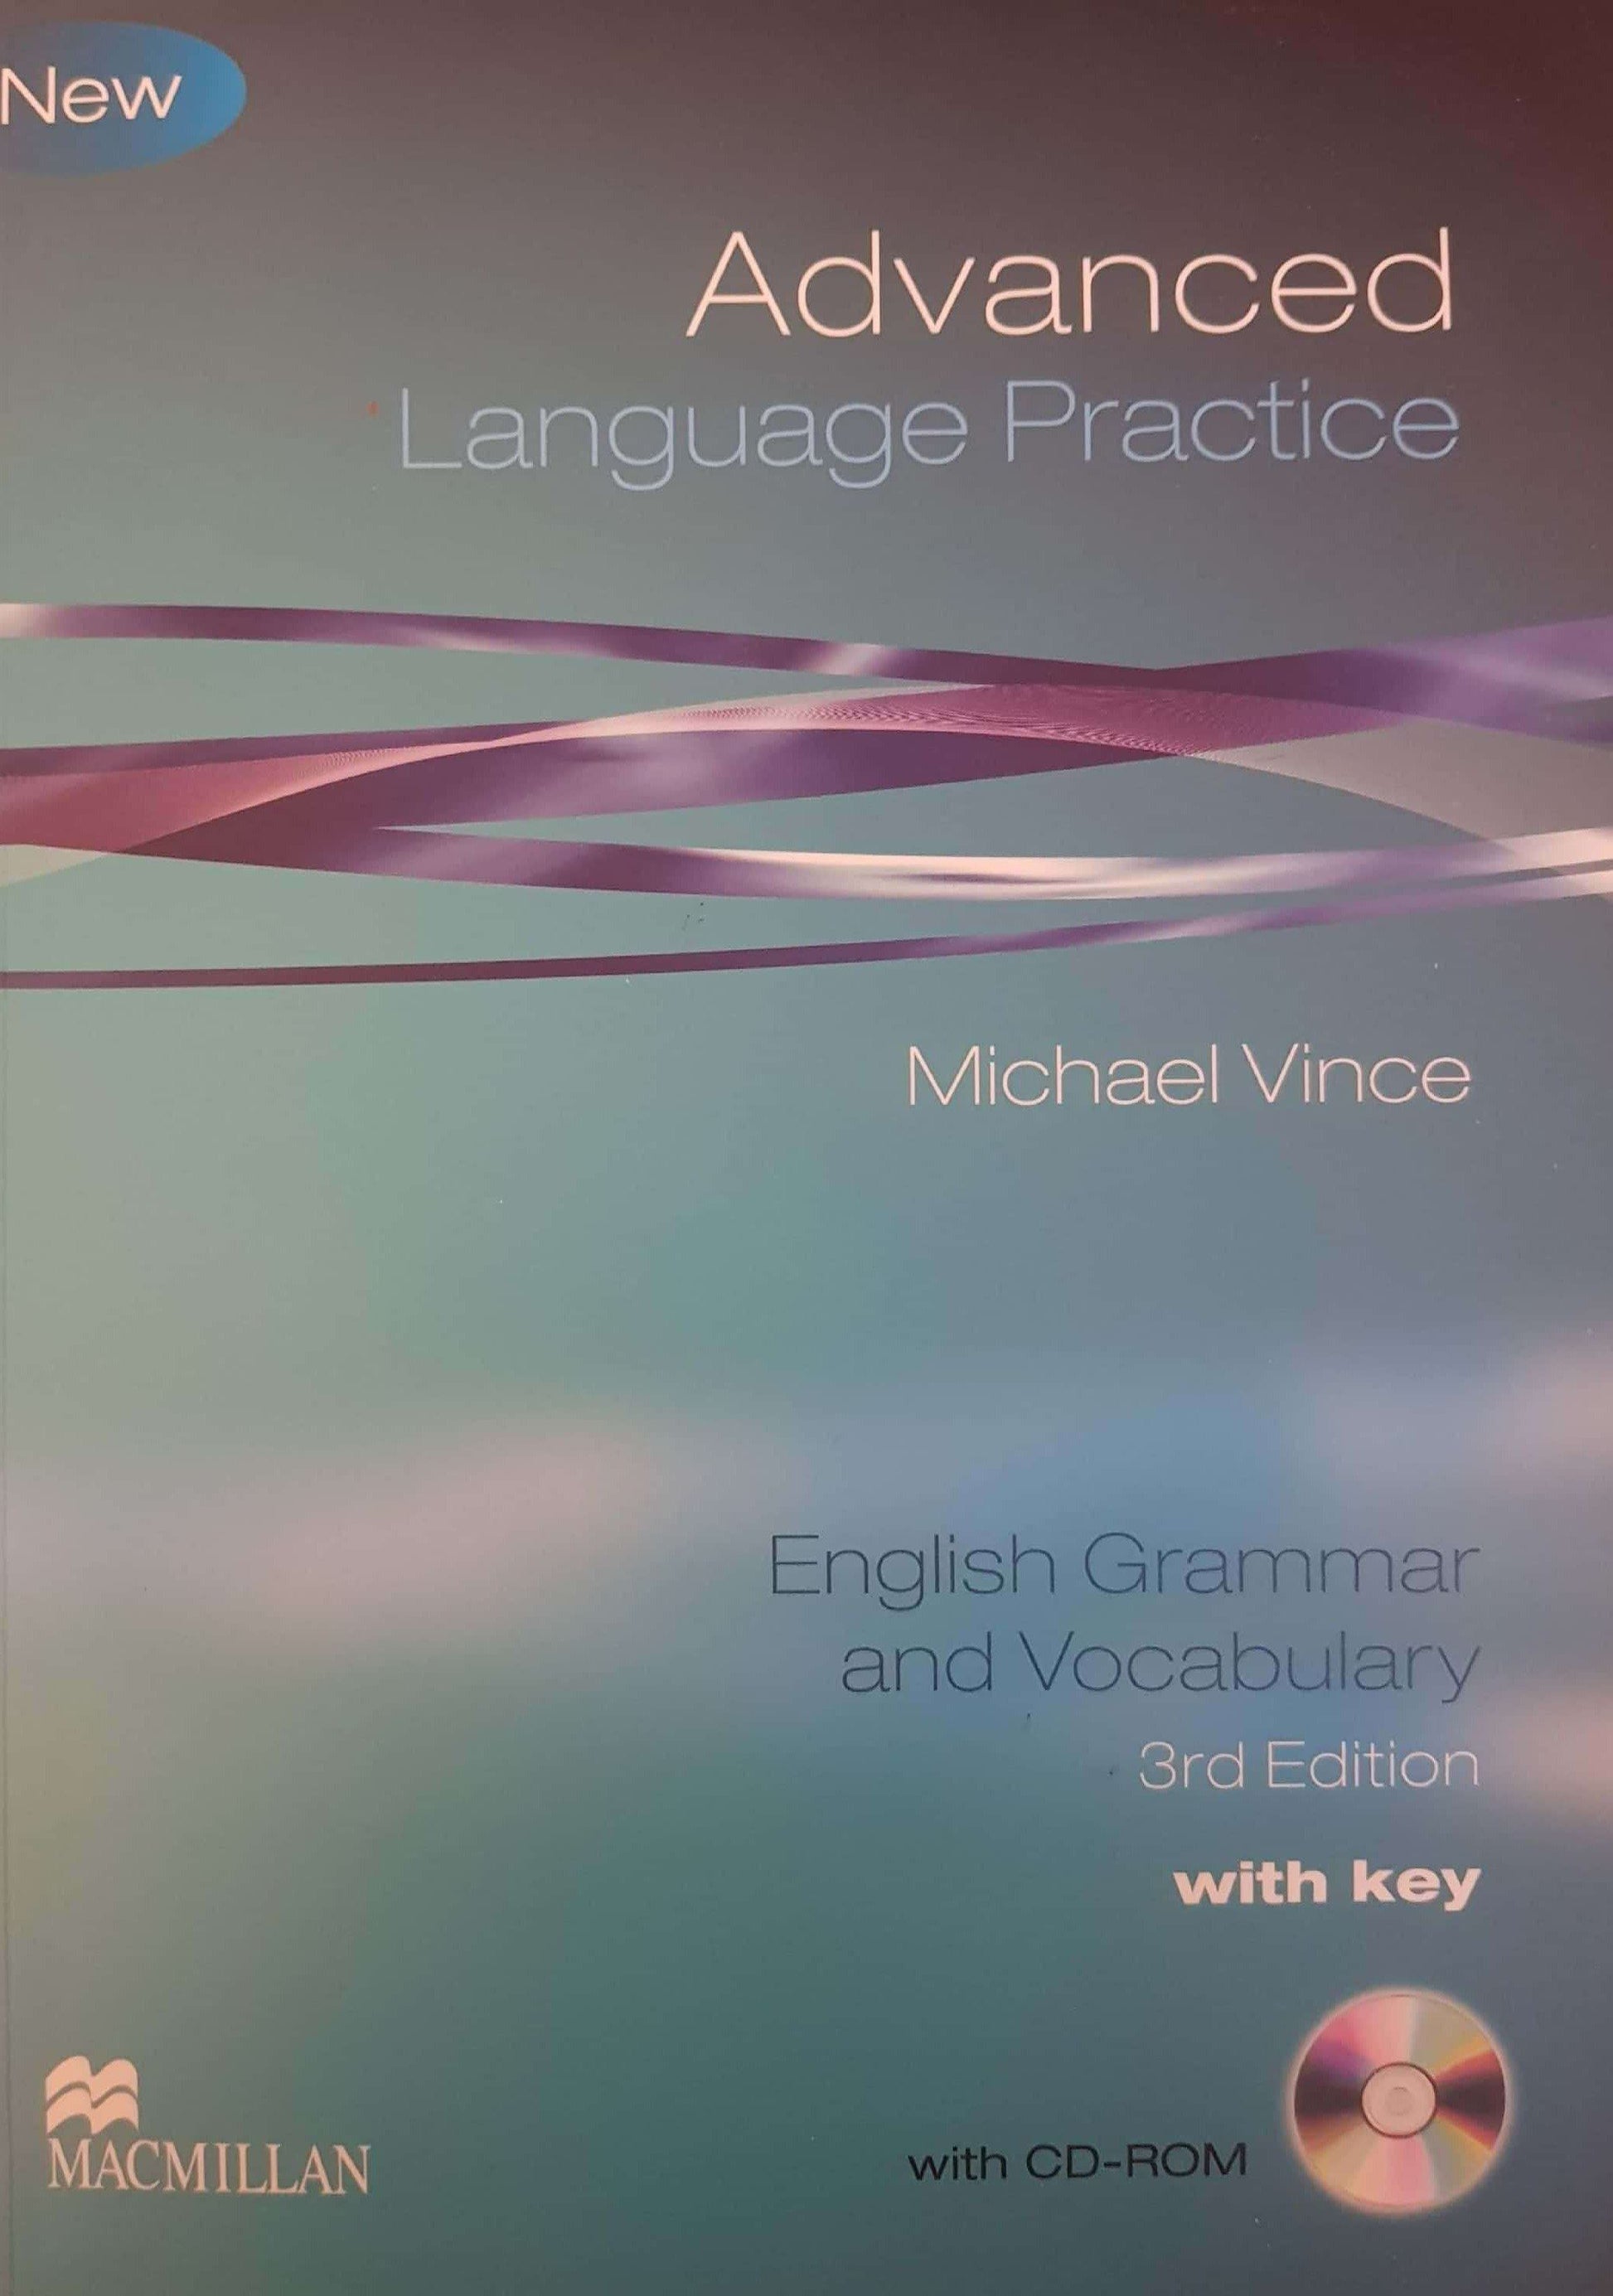 Advanced Language Practice Like New Not Appicable  (4619395891255)